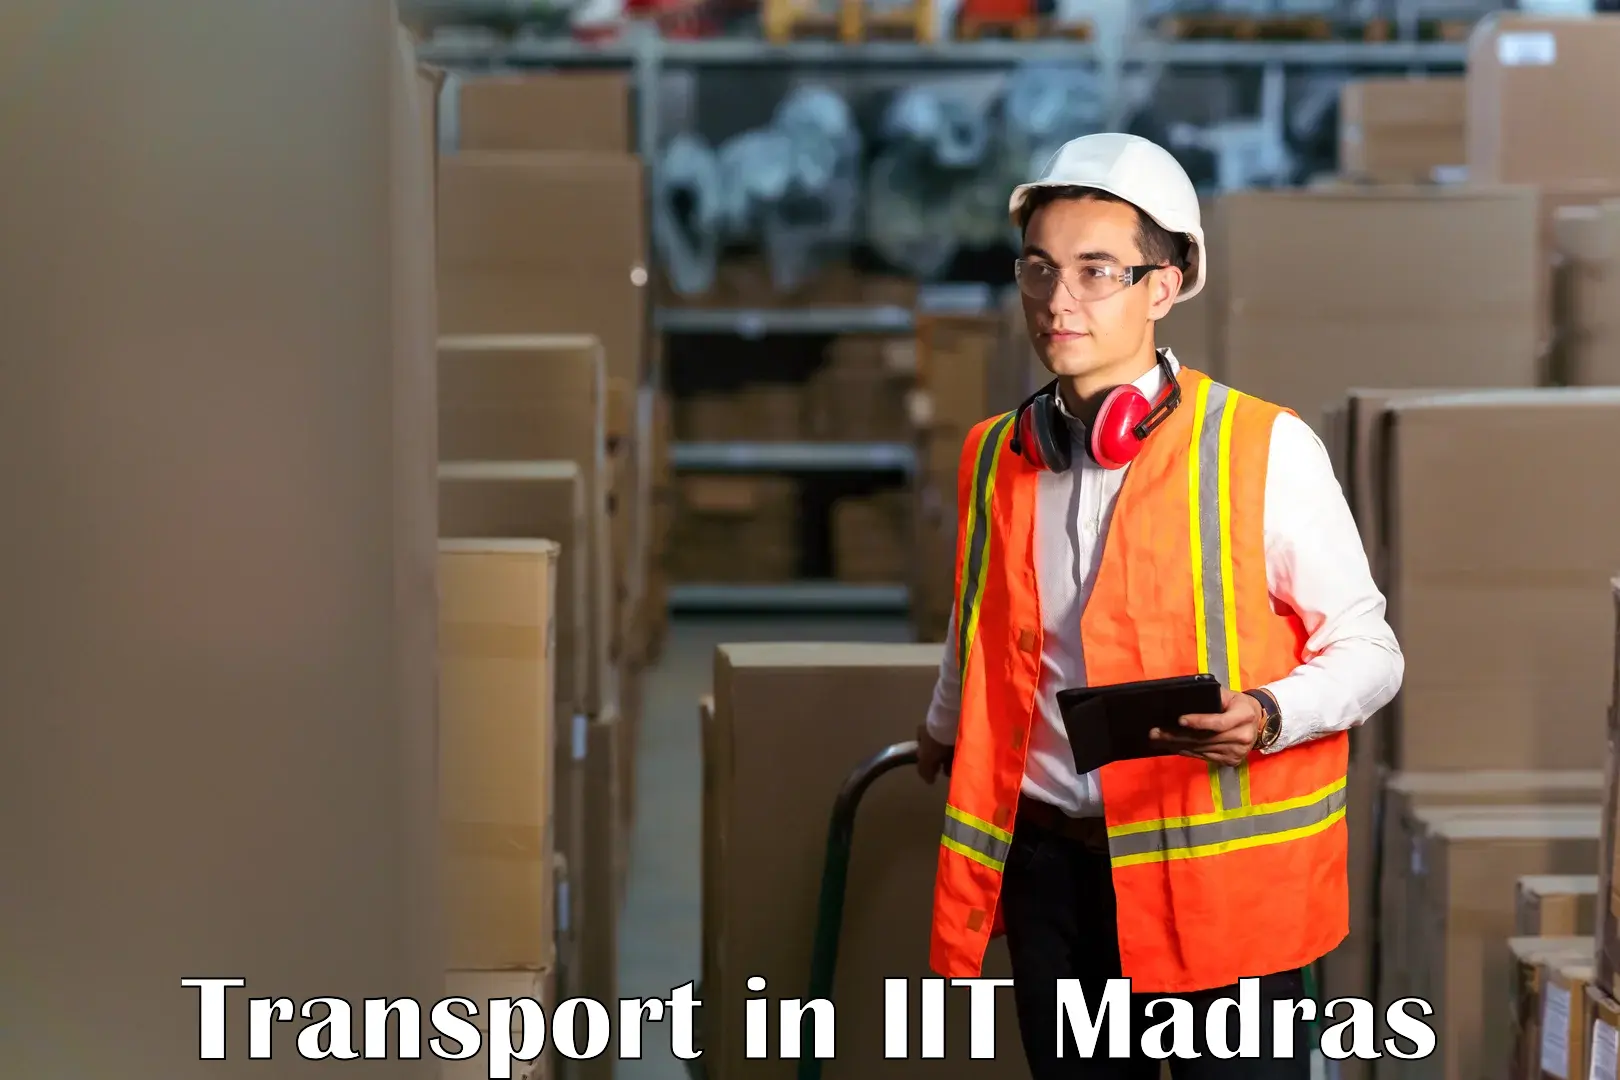 Pick up transport service in IIT Madras